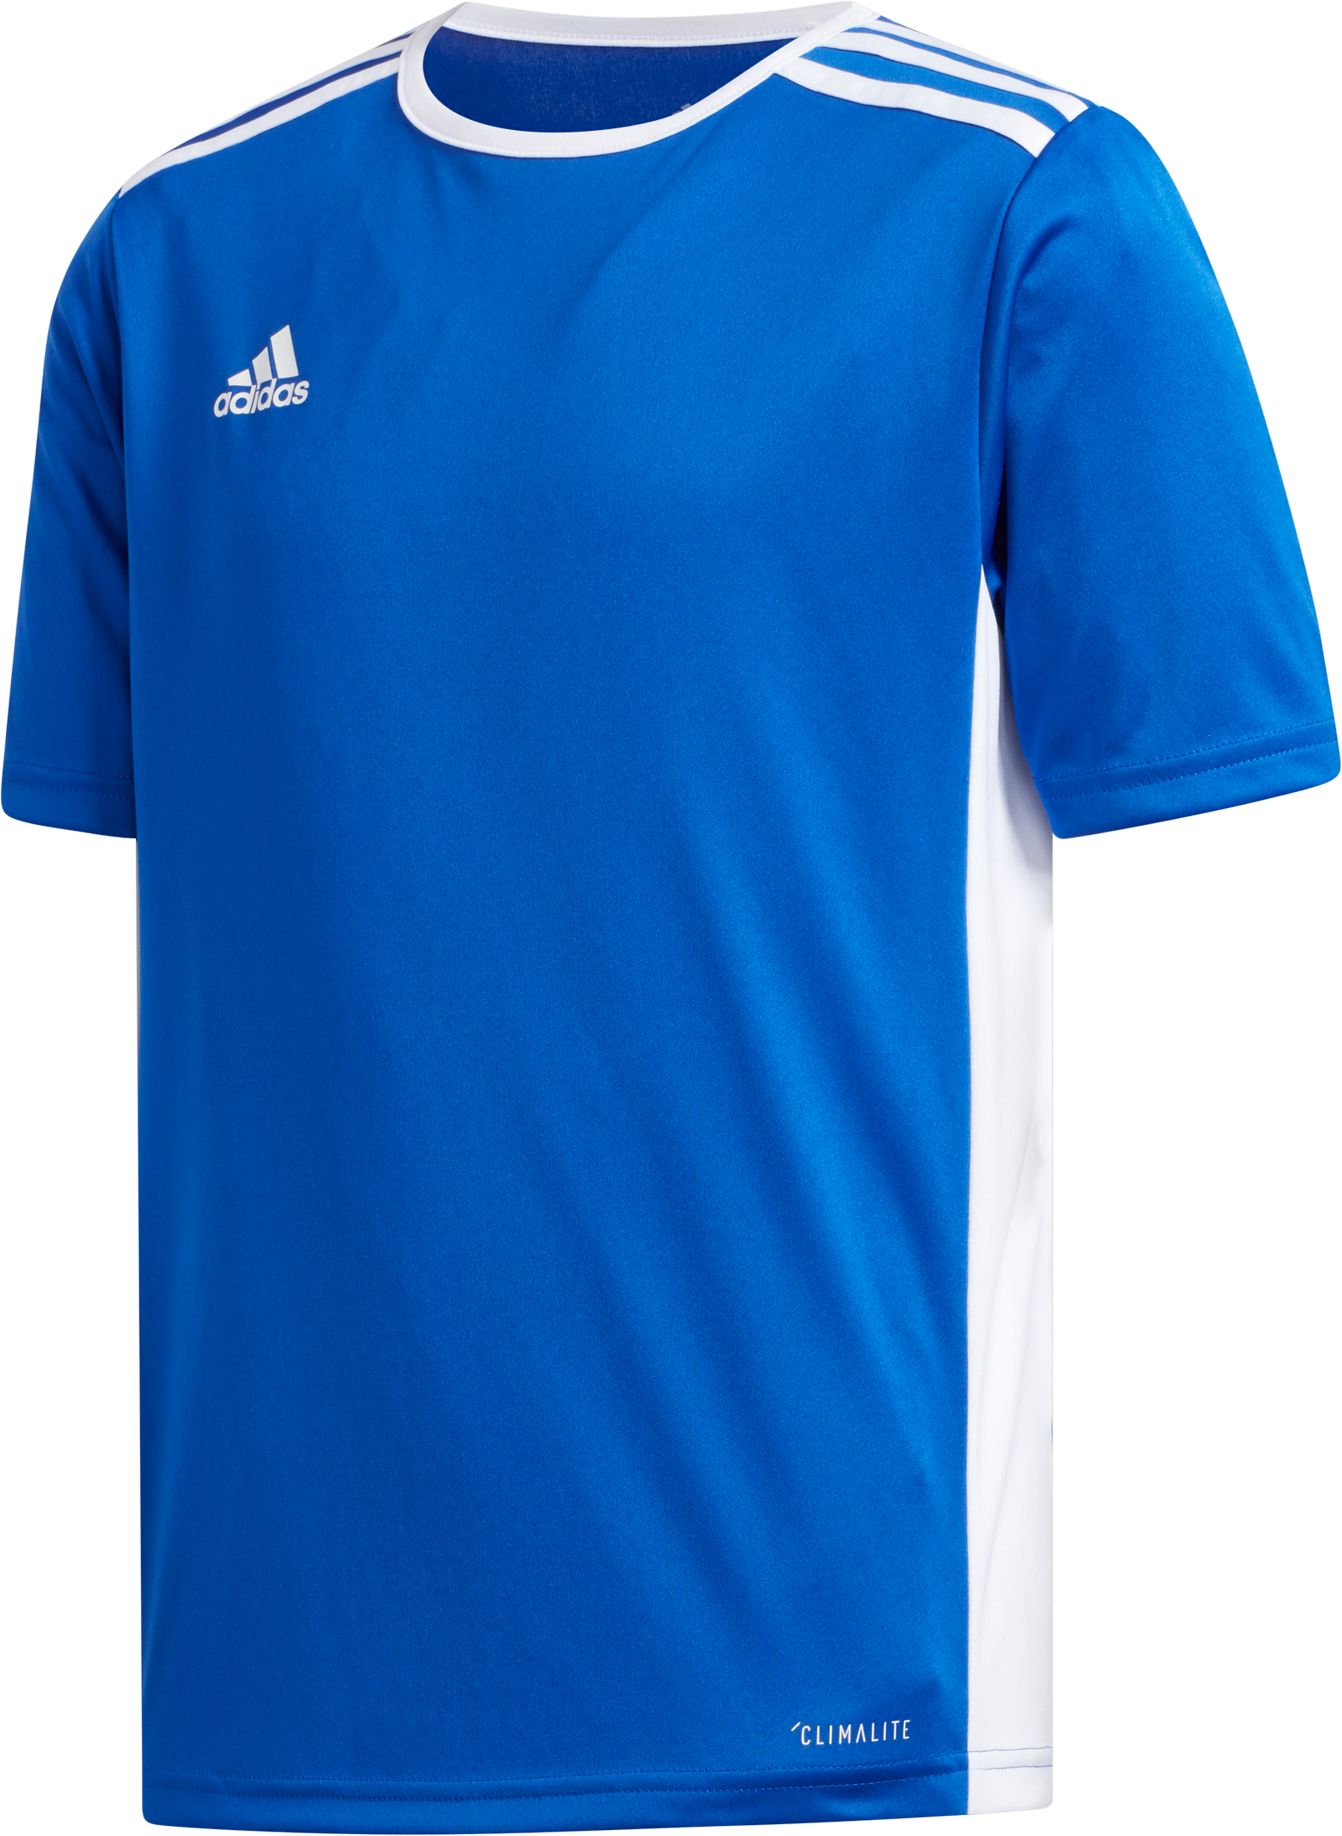 adidas Youth Entrada 18 Jersey | DICK'S Sporting Goods